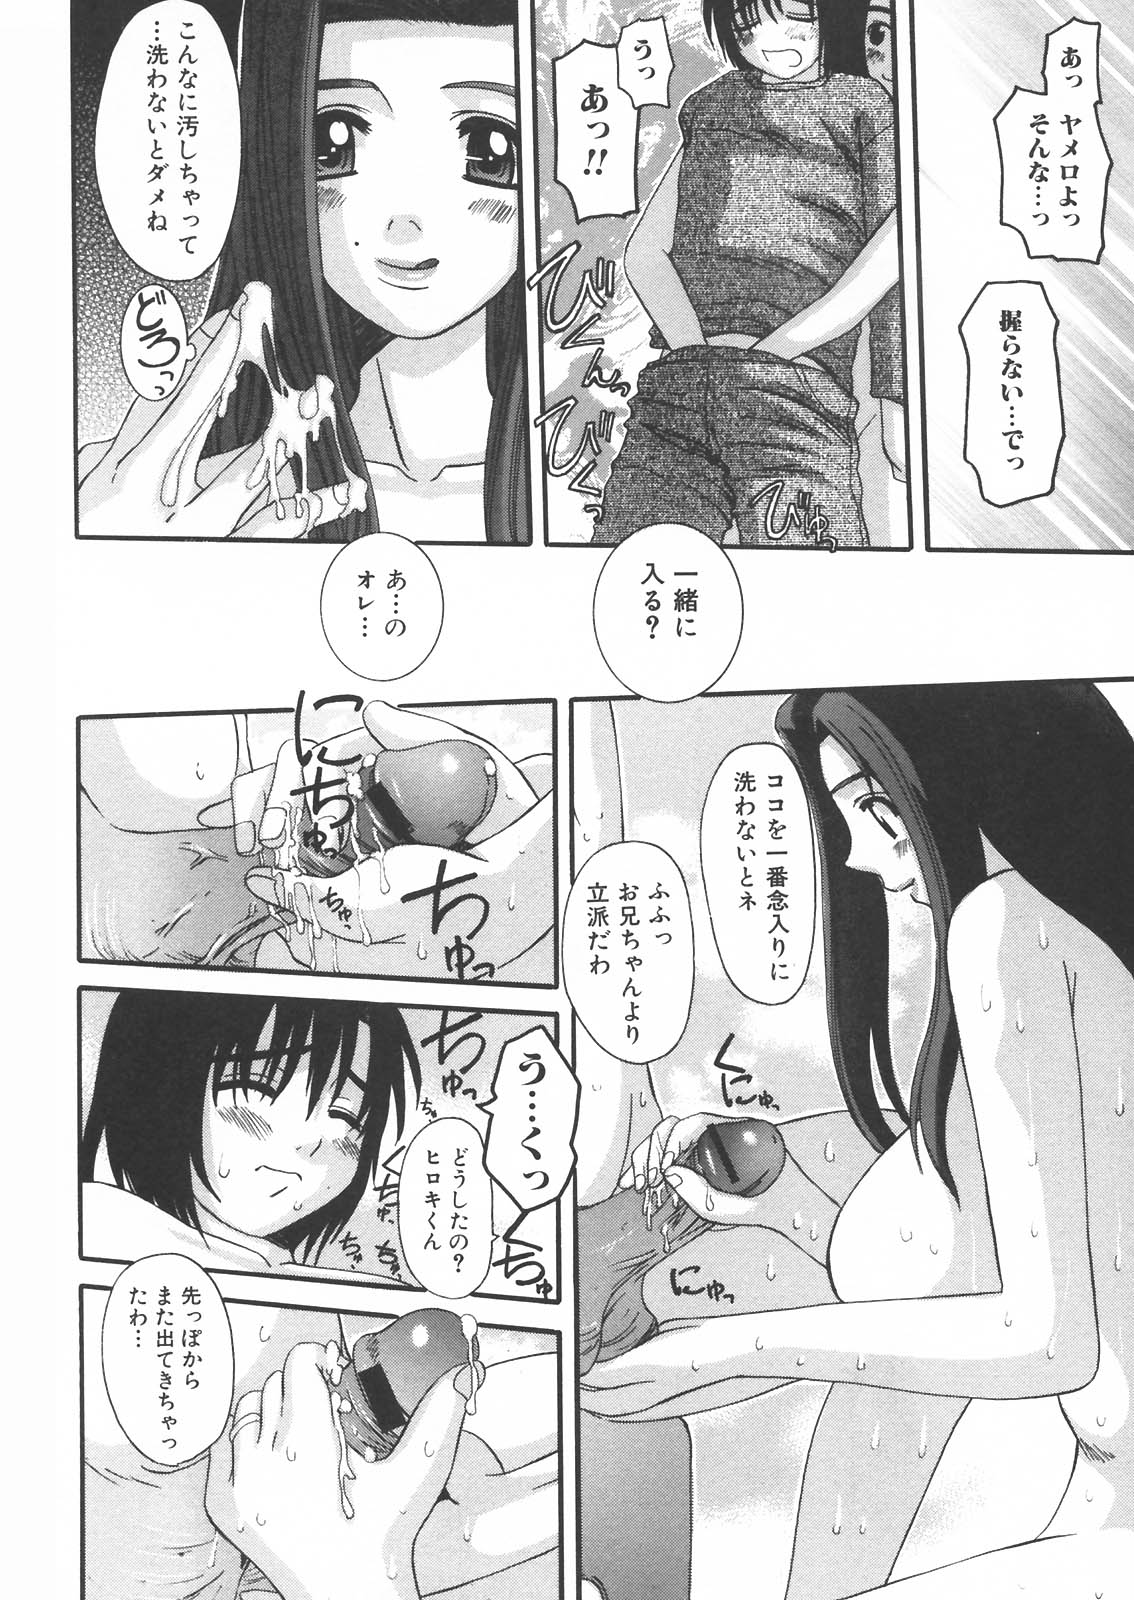 [Anthology] Haha to Ko no Inya - Mother's and son's indecent night - page 14 full